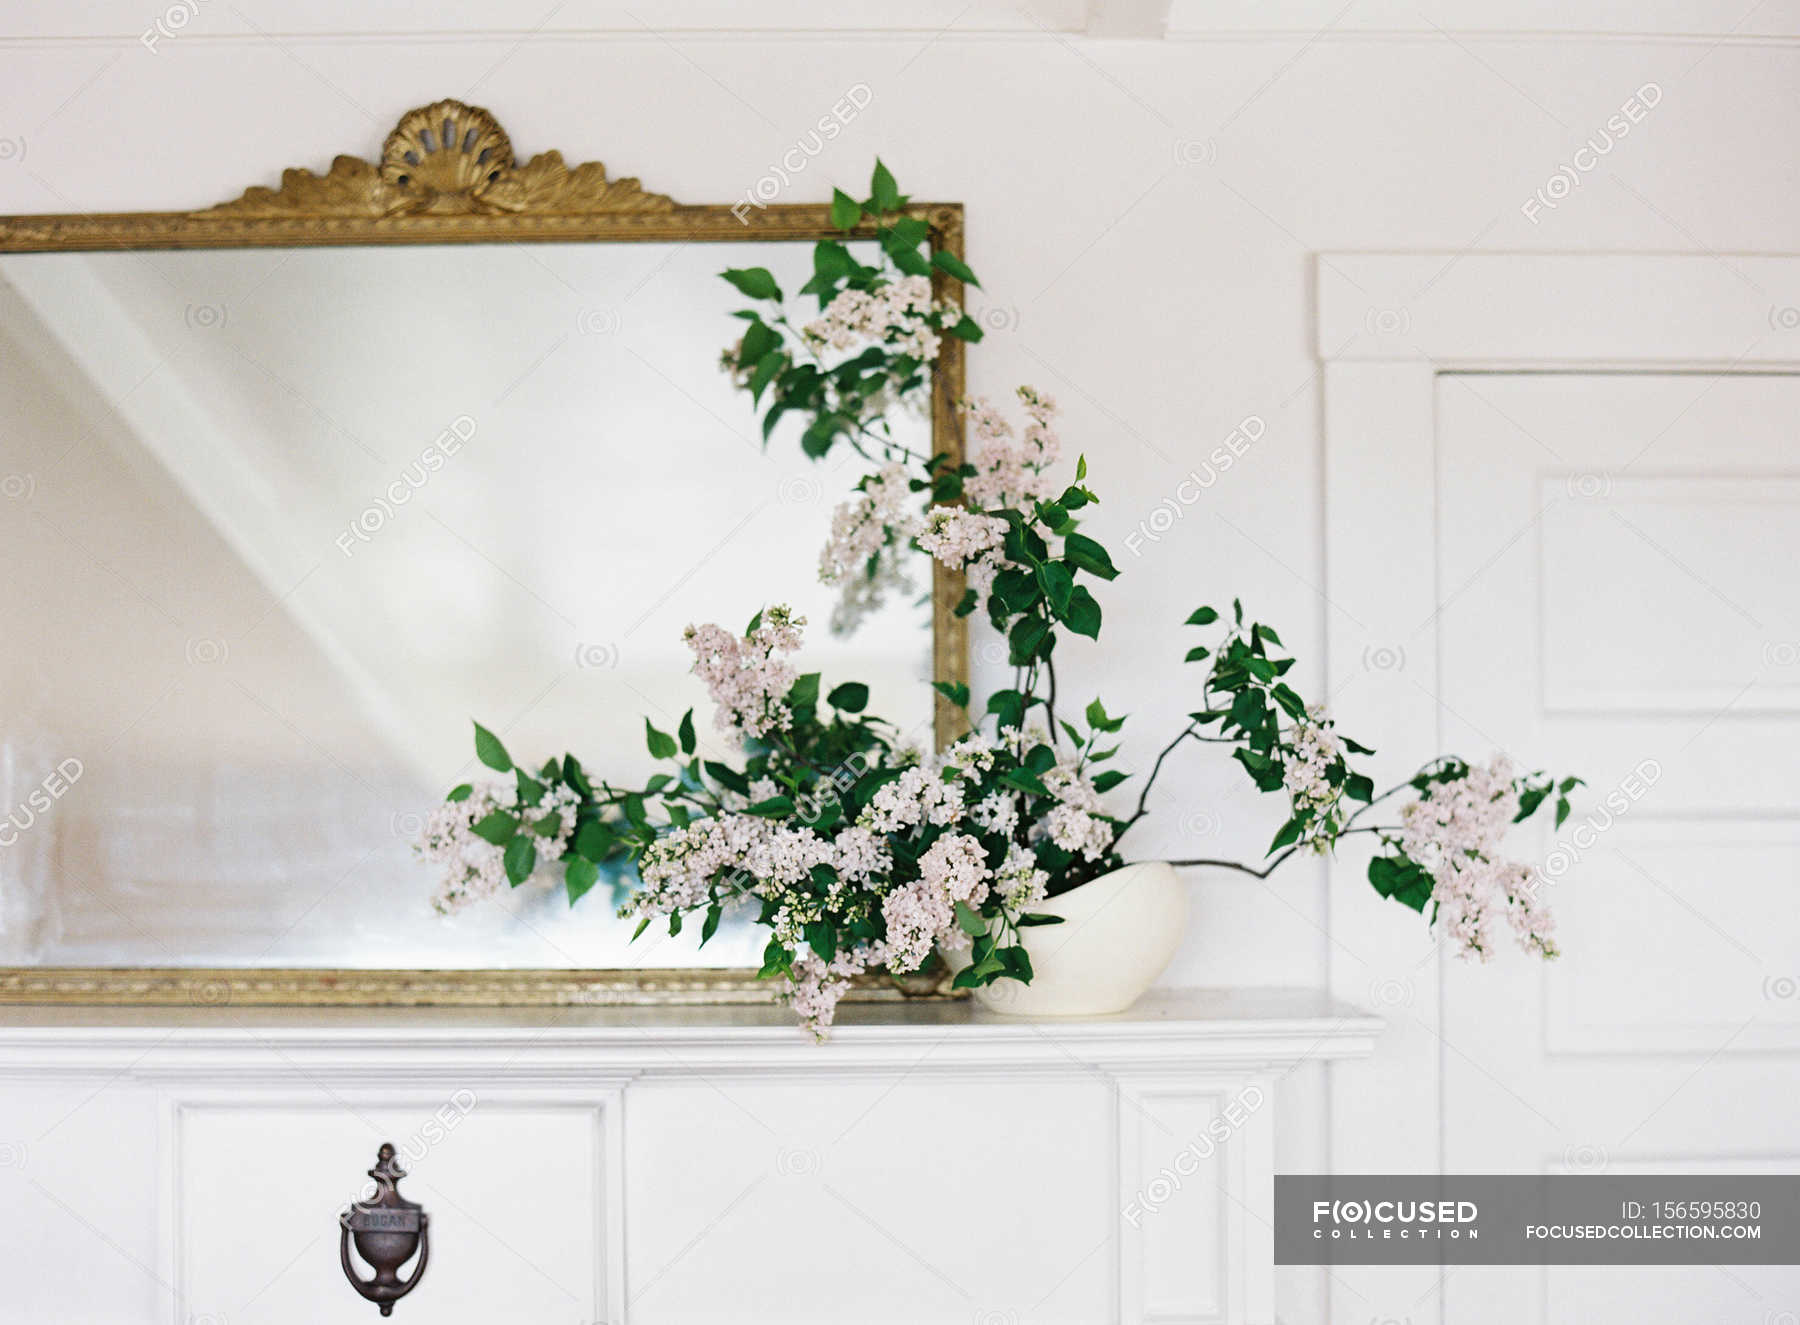 Fresh lilac flowers in vase — Stock Photo | #156595830